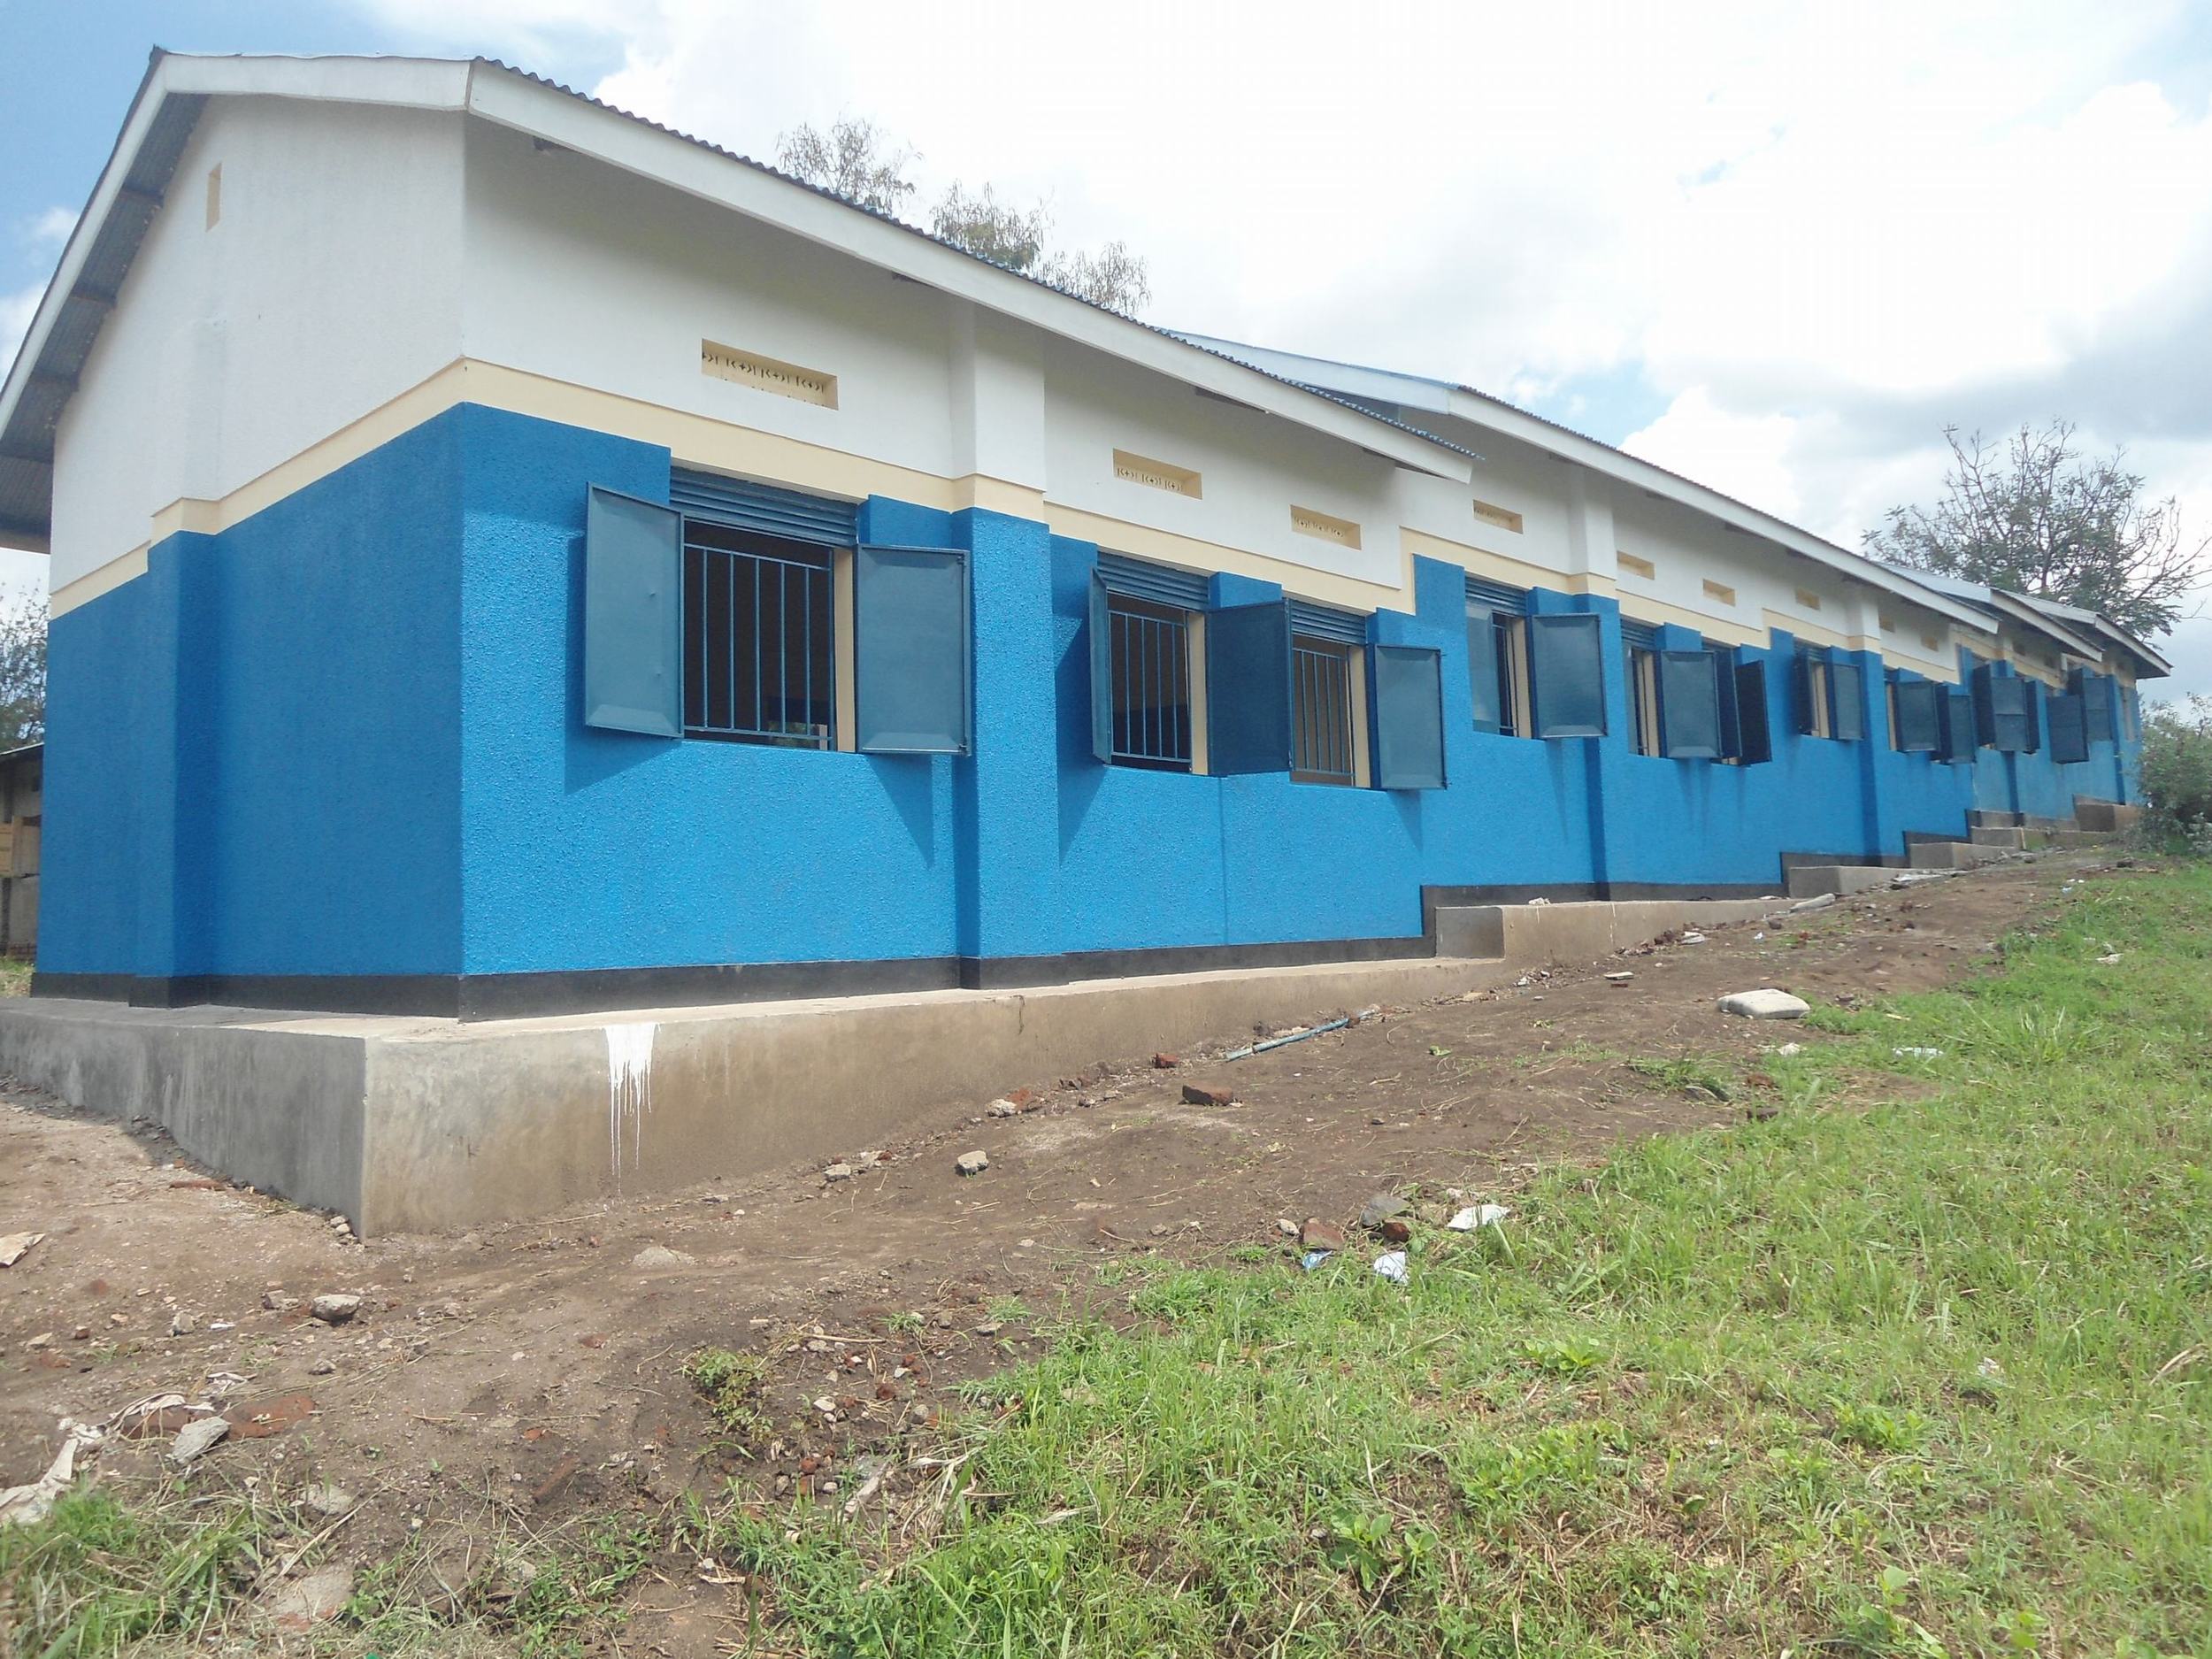 Classrooms complete - October 2015